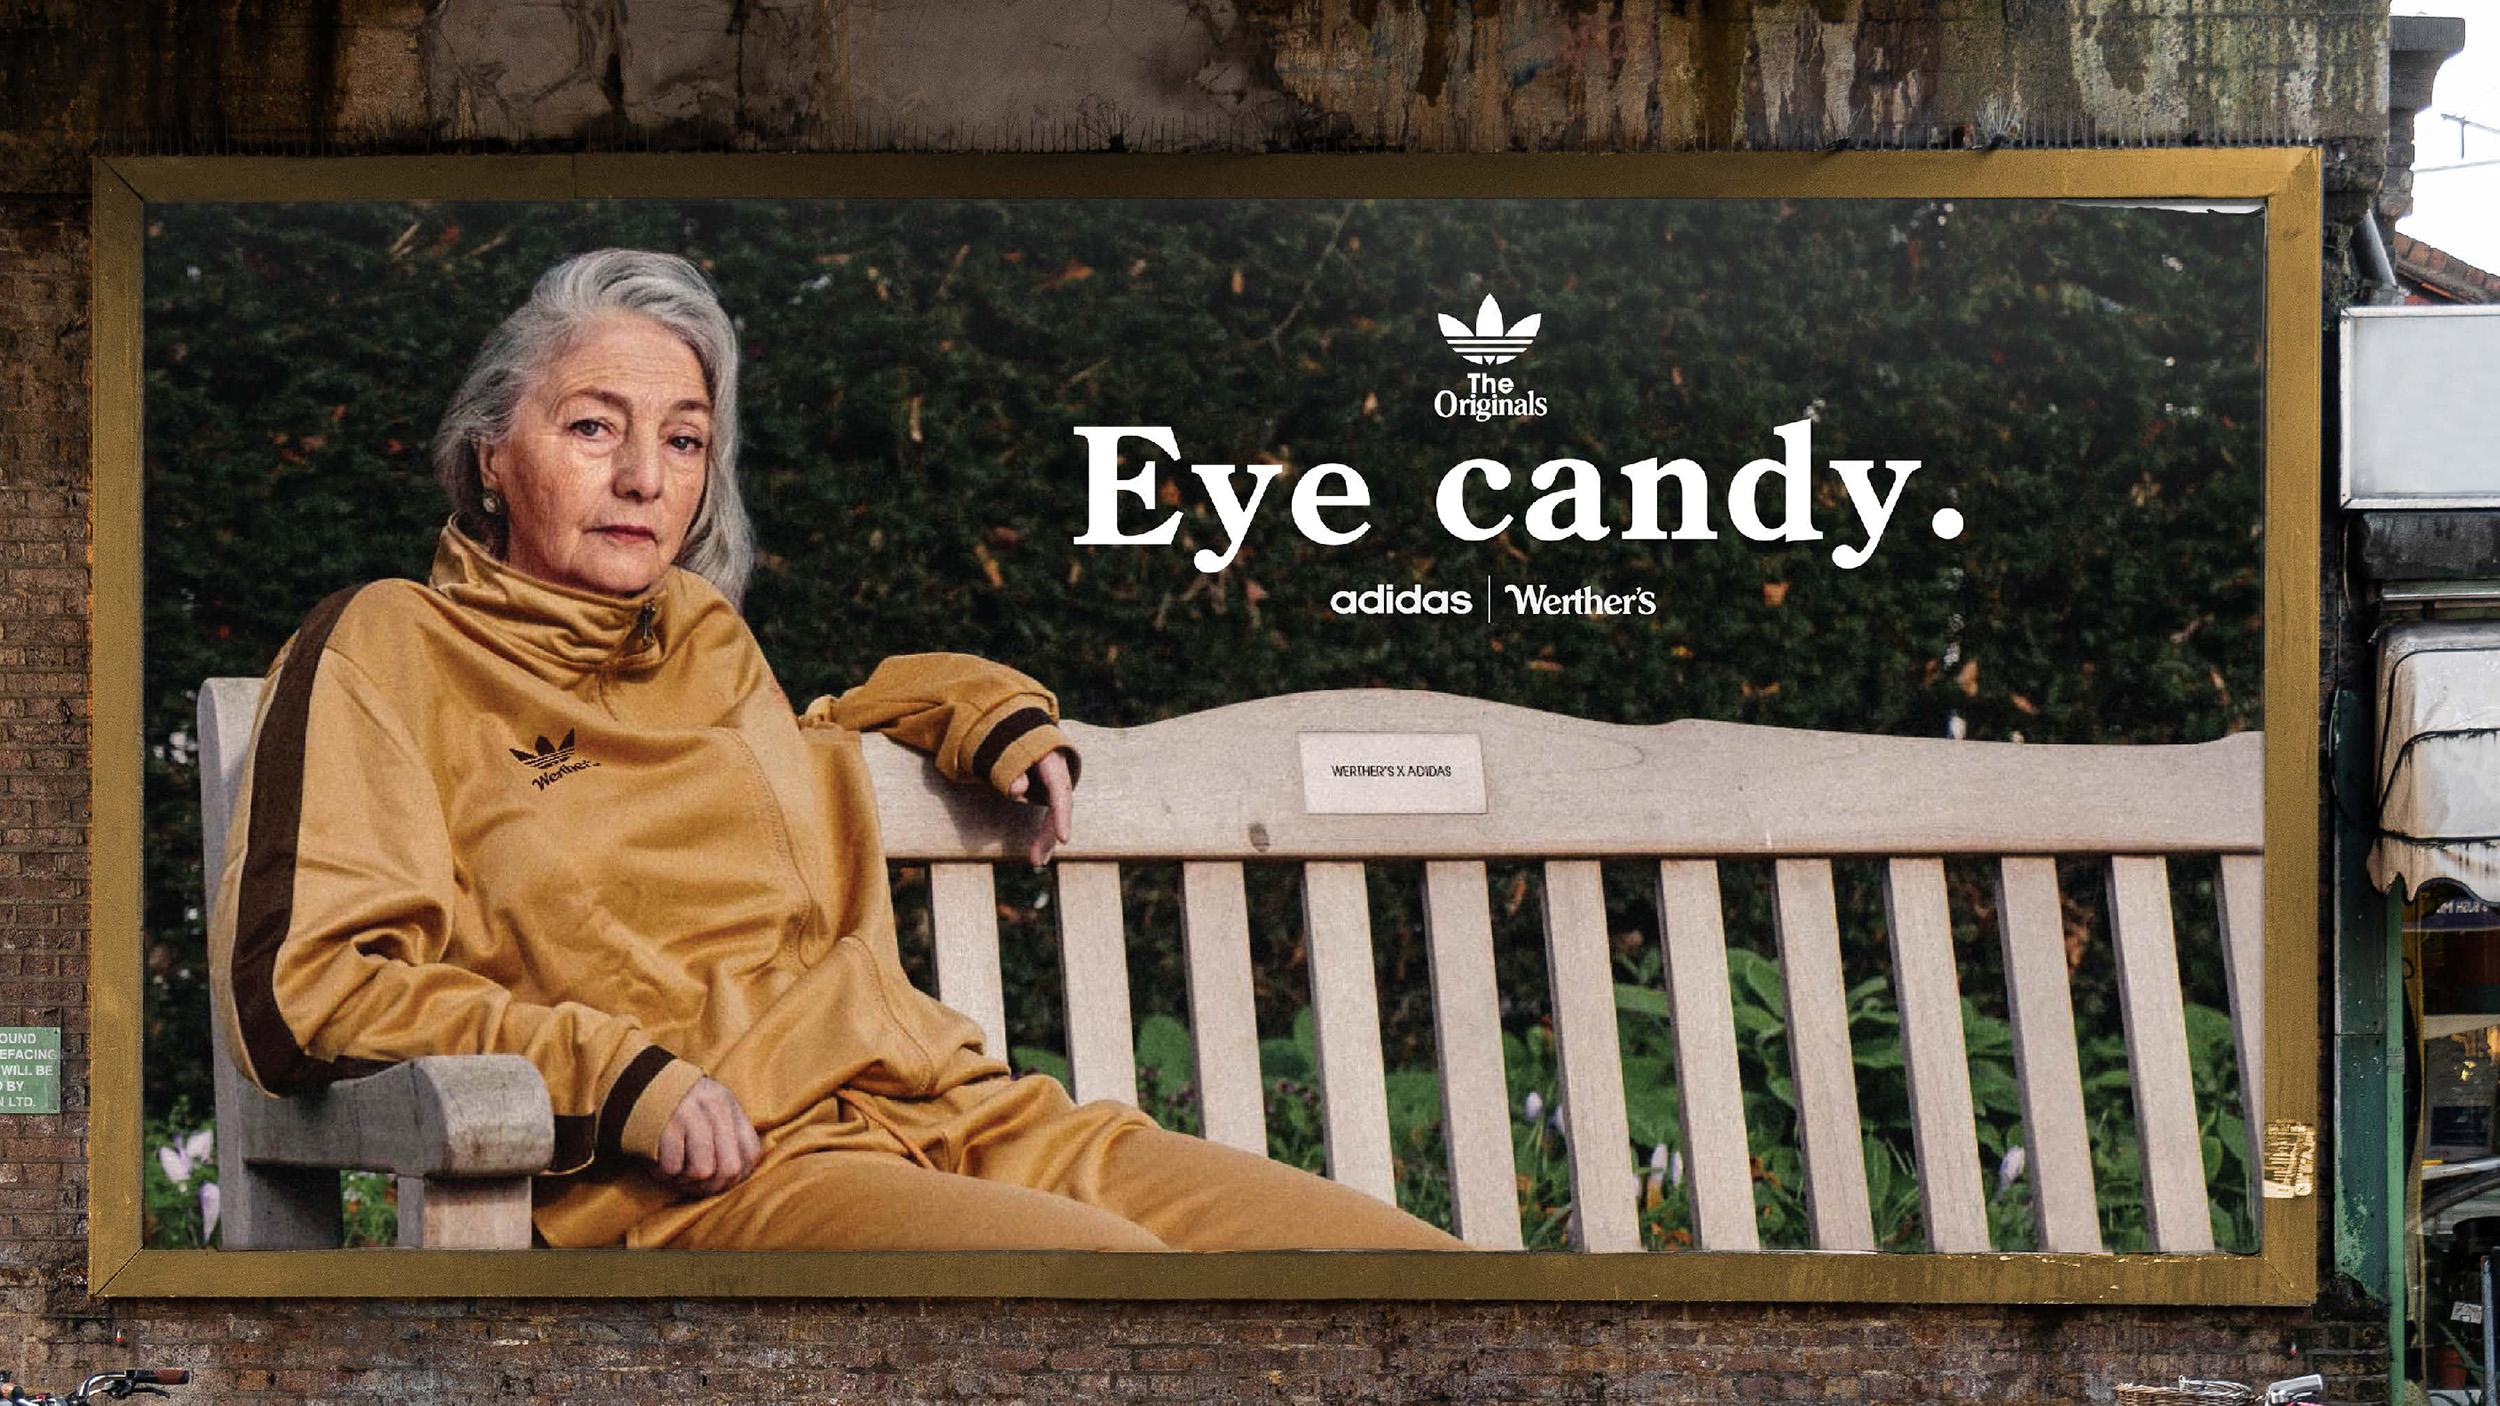 Thumbnail shows a billboard containing an image of an older lady posed on a bench wearing a gold Adidas Originals tracksuit.